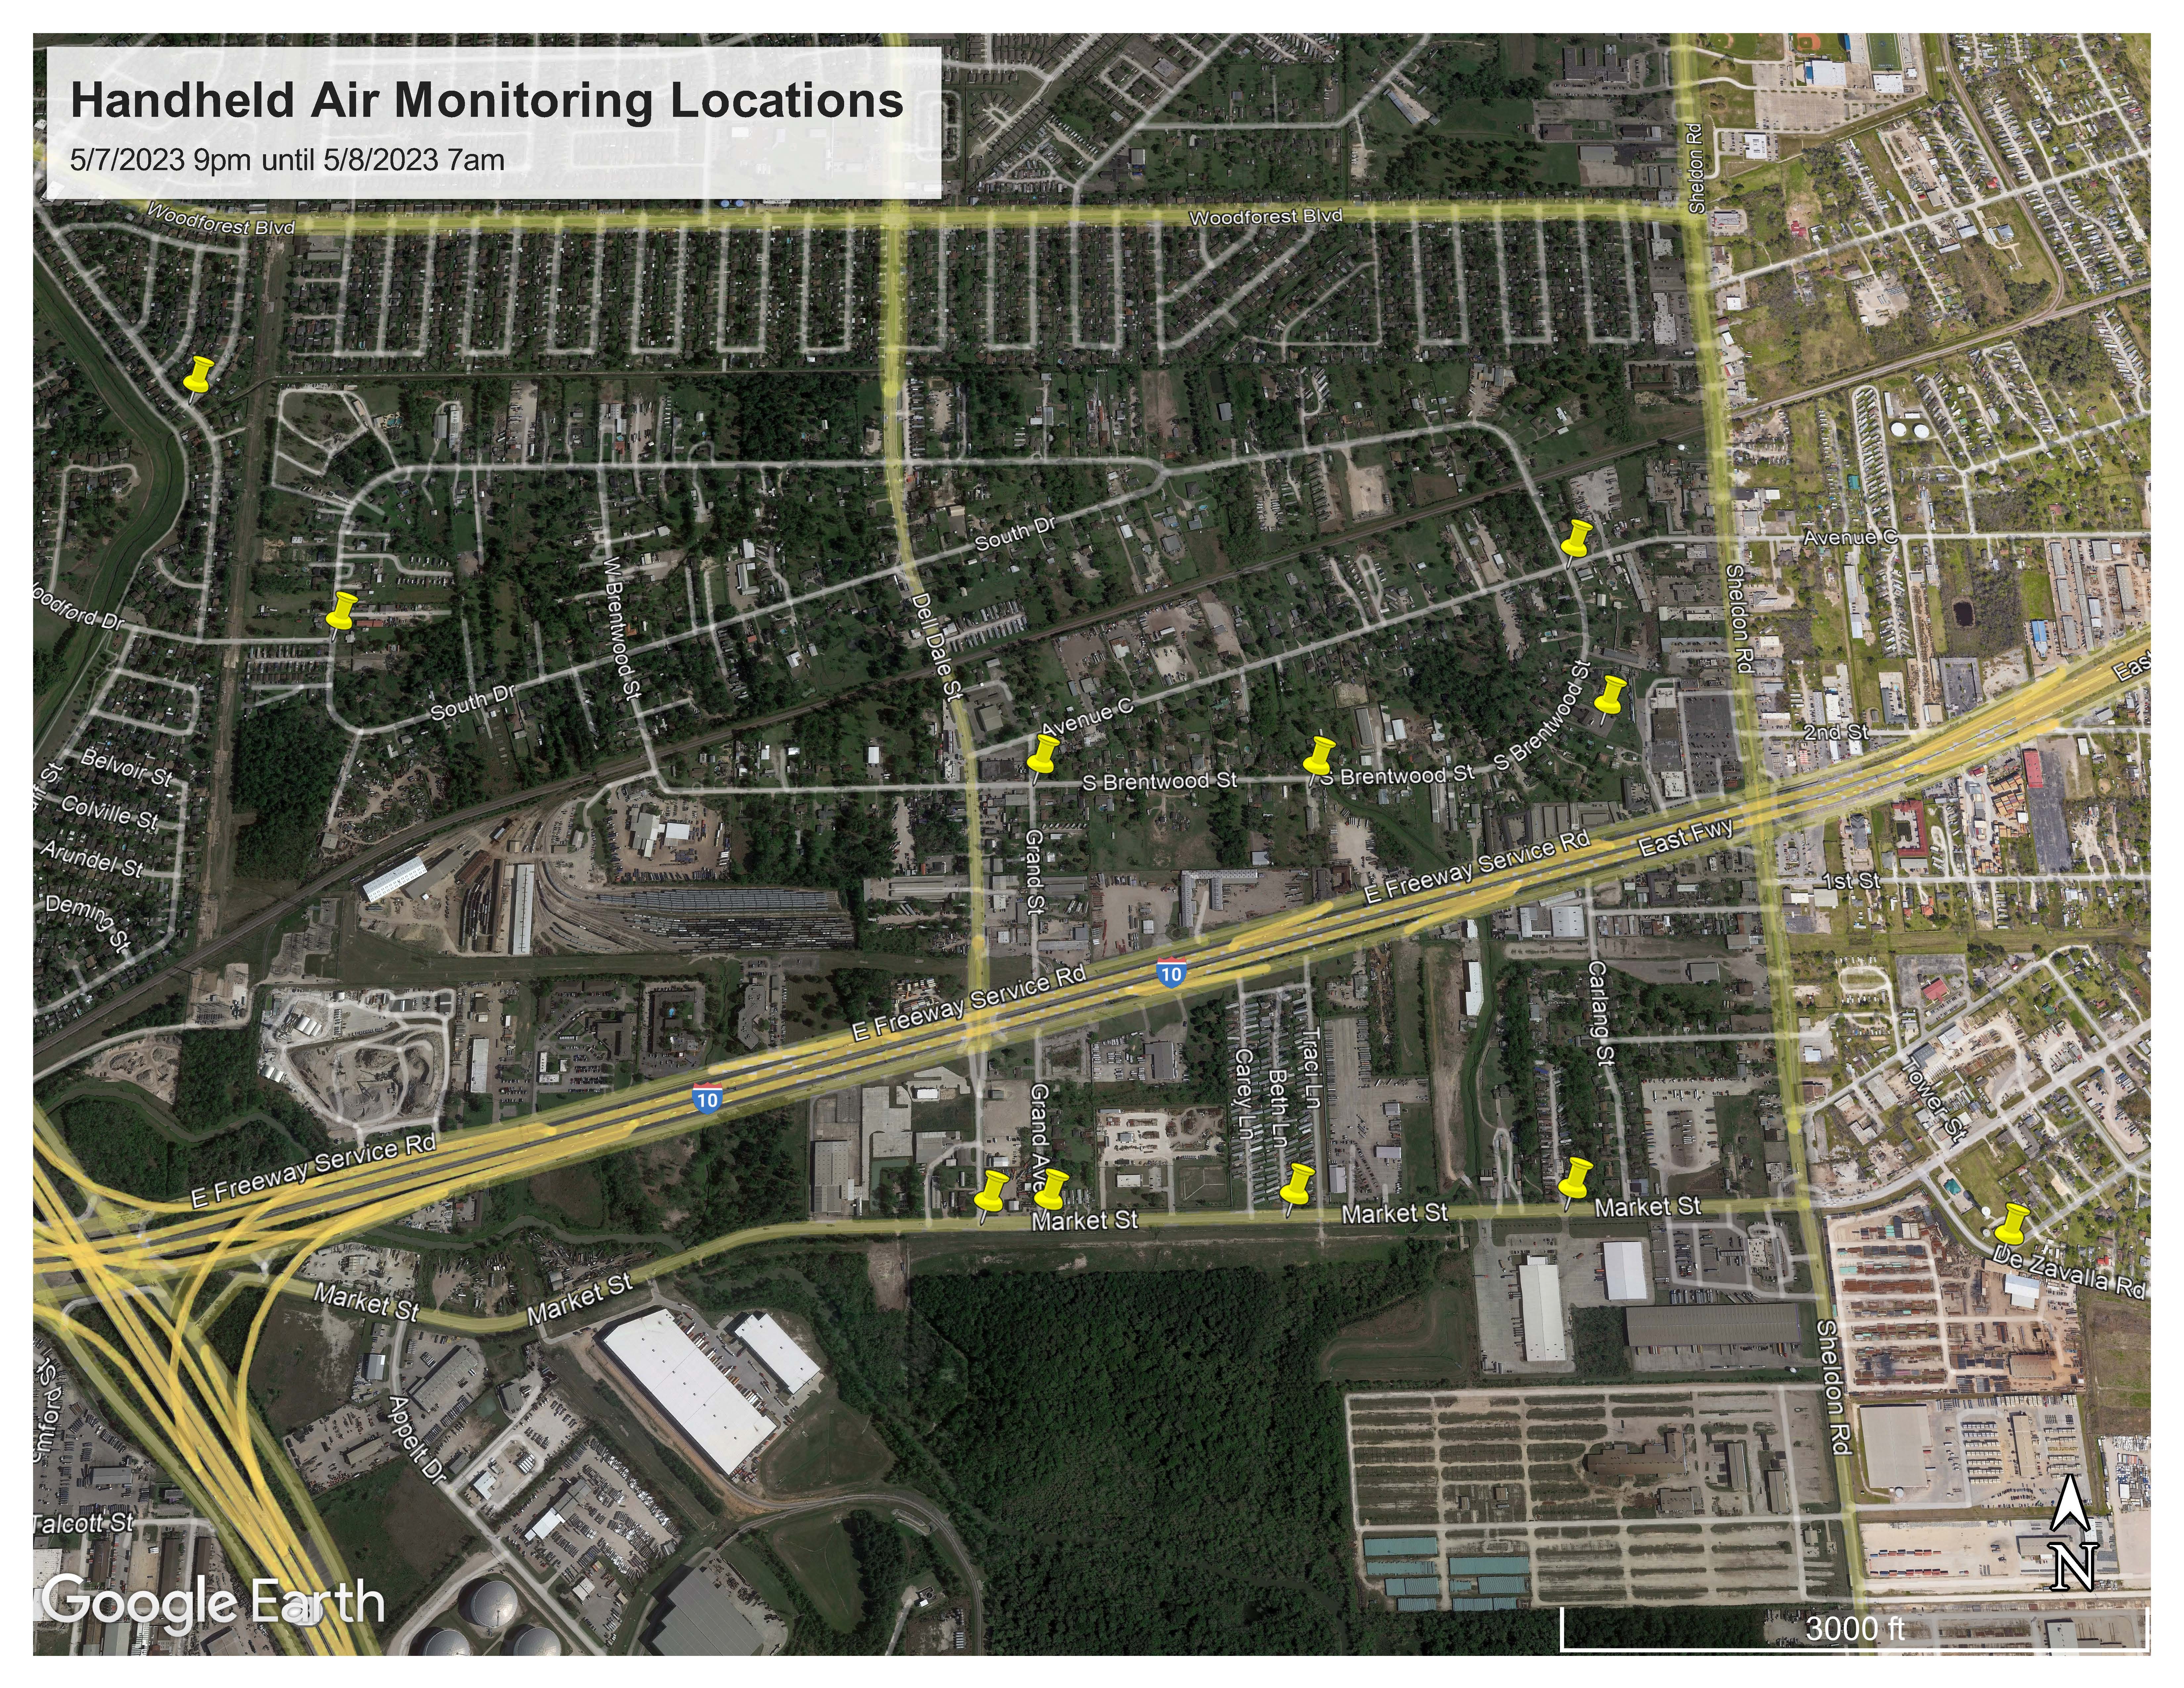 Handeld Air Monitoring Locations 5-7-2023 9pm to 5-8-2023 7am.jpg